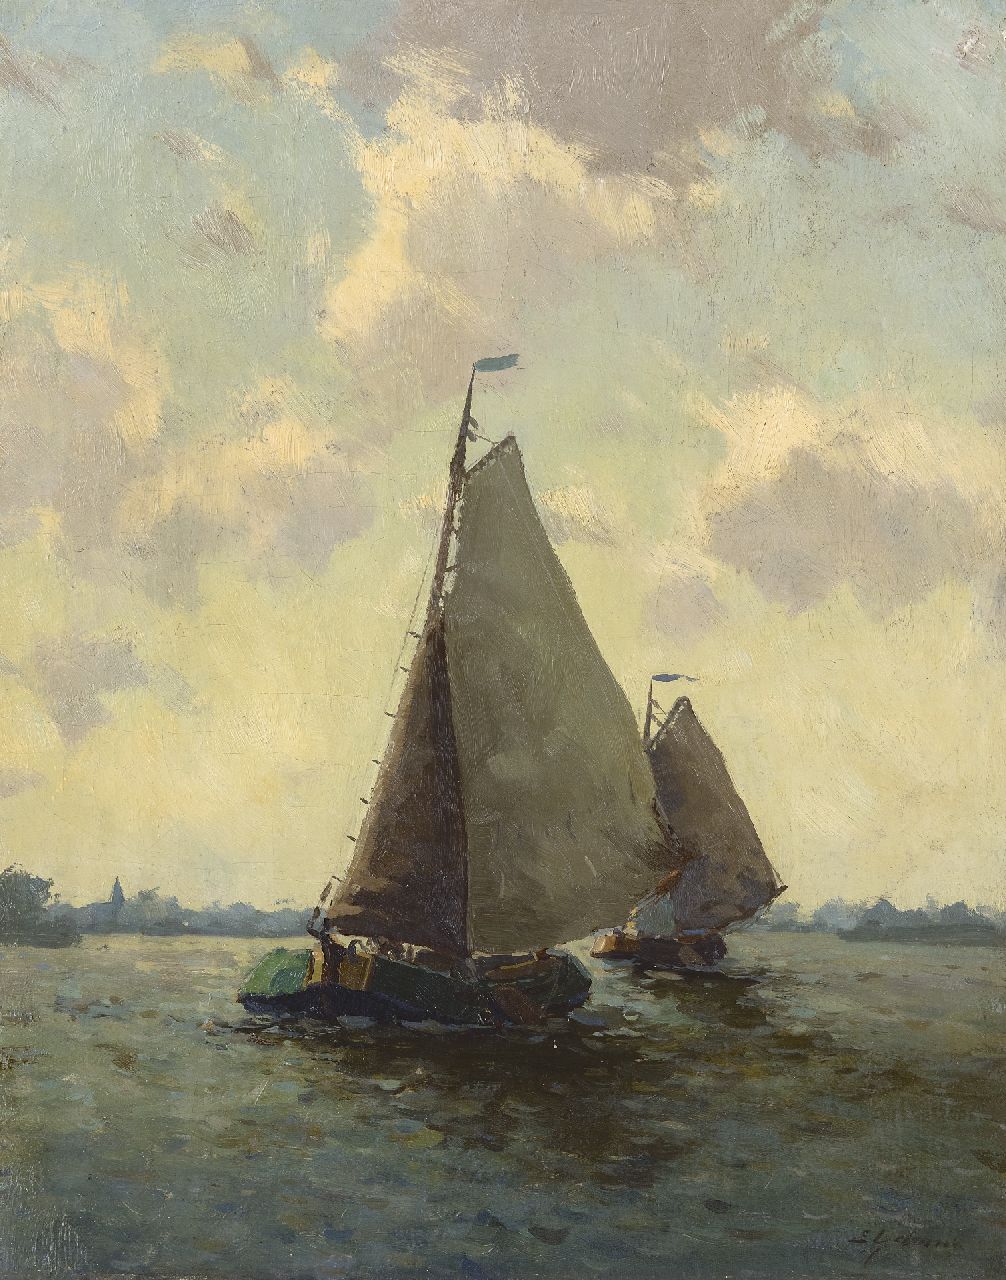 Ydema E.  | Egnatius Ydema, Sailing ships, oil on canvas 50.8 x 40.9 cm, signed l.r. and on the stretcher